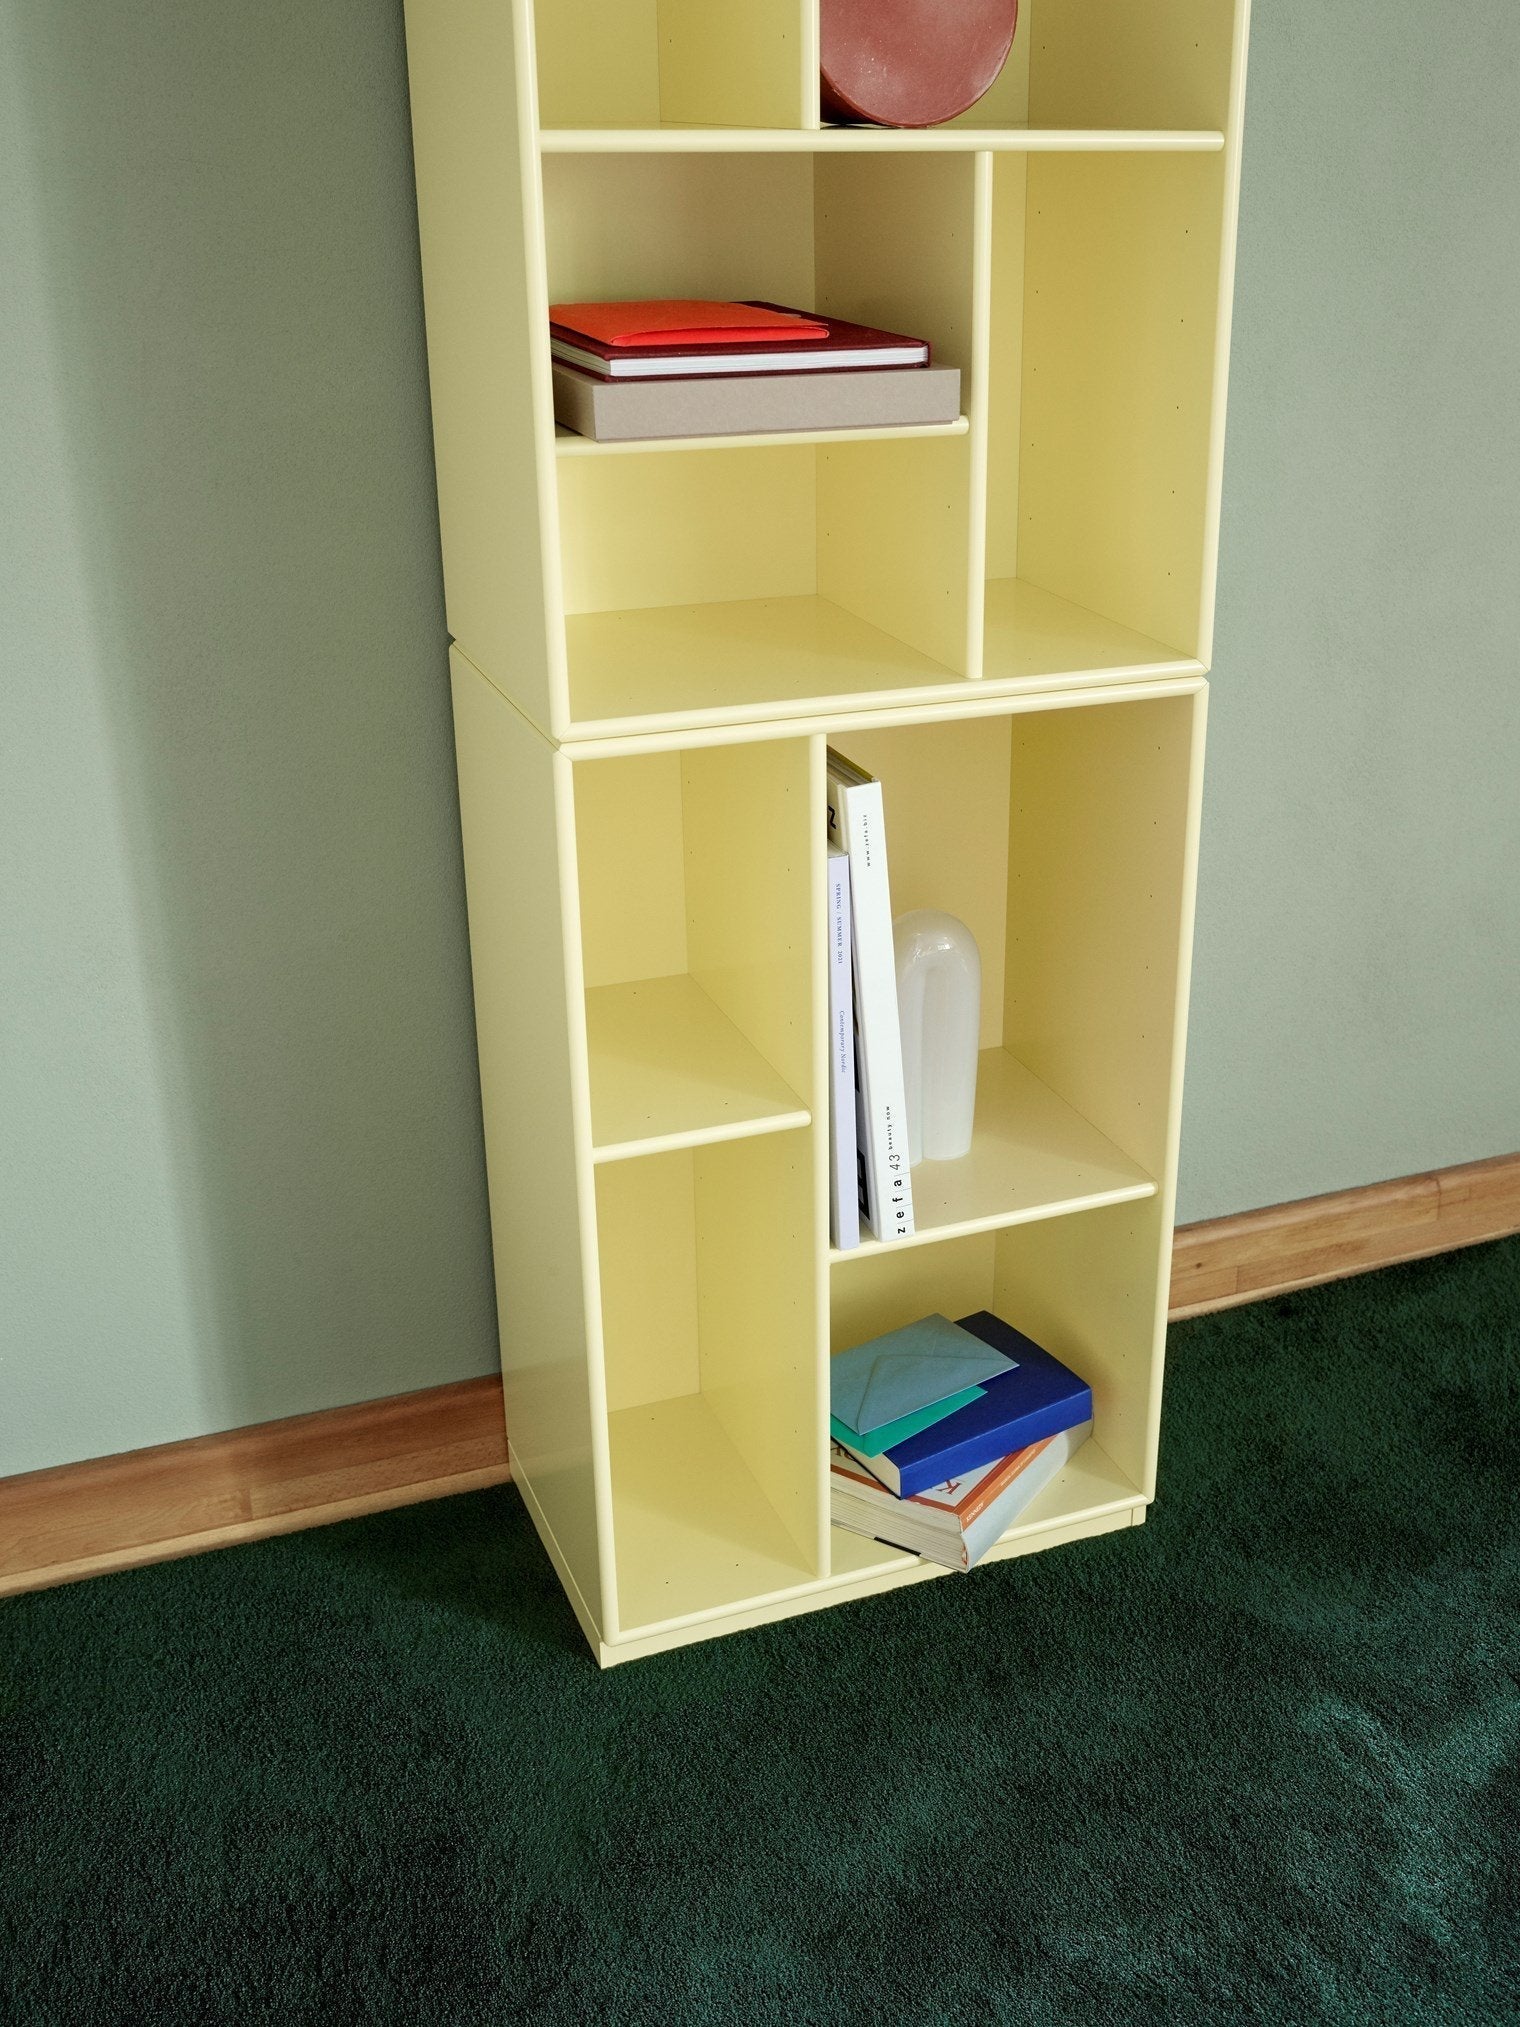 Montana Loom High Bookcase With Suspension Rail, Oat